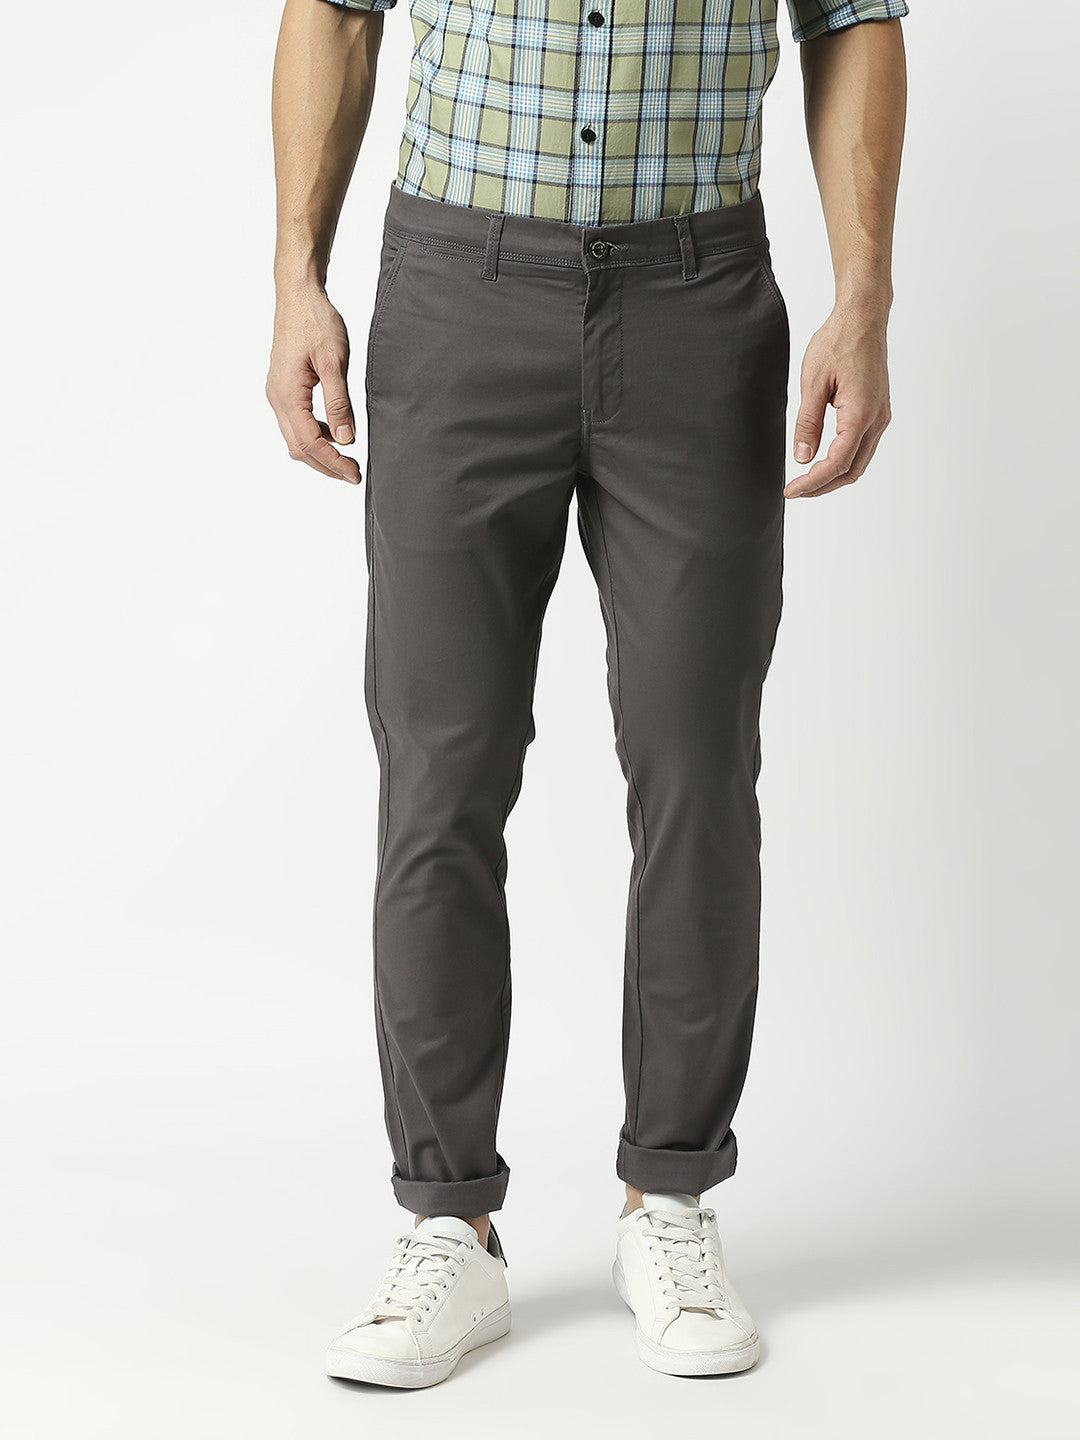 Charcoal Grey Slim Tapered Cotton Dobby Lycra Trouser